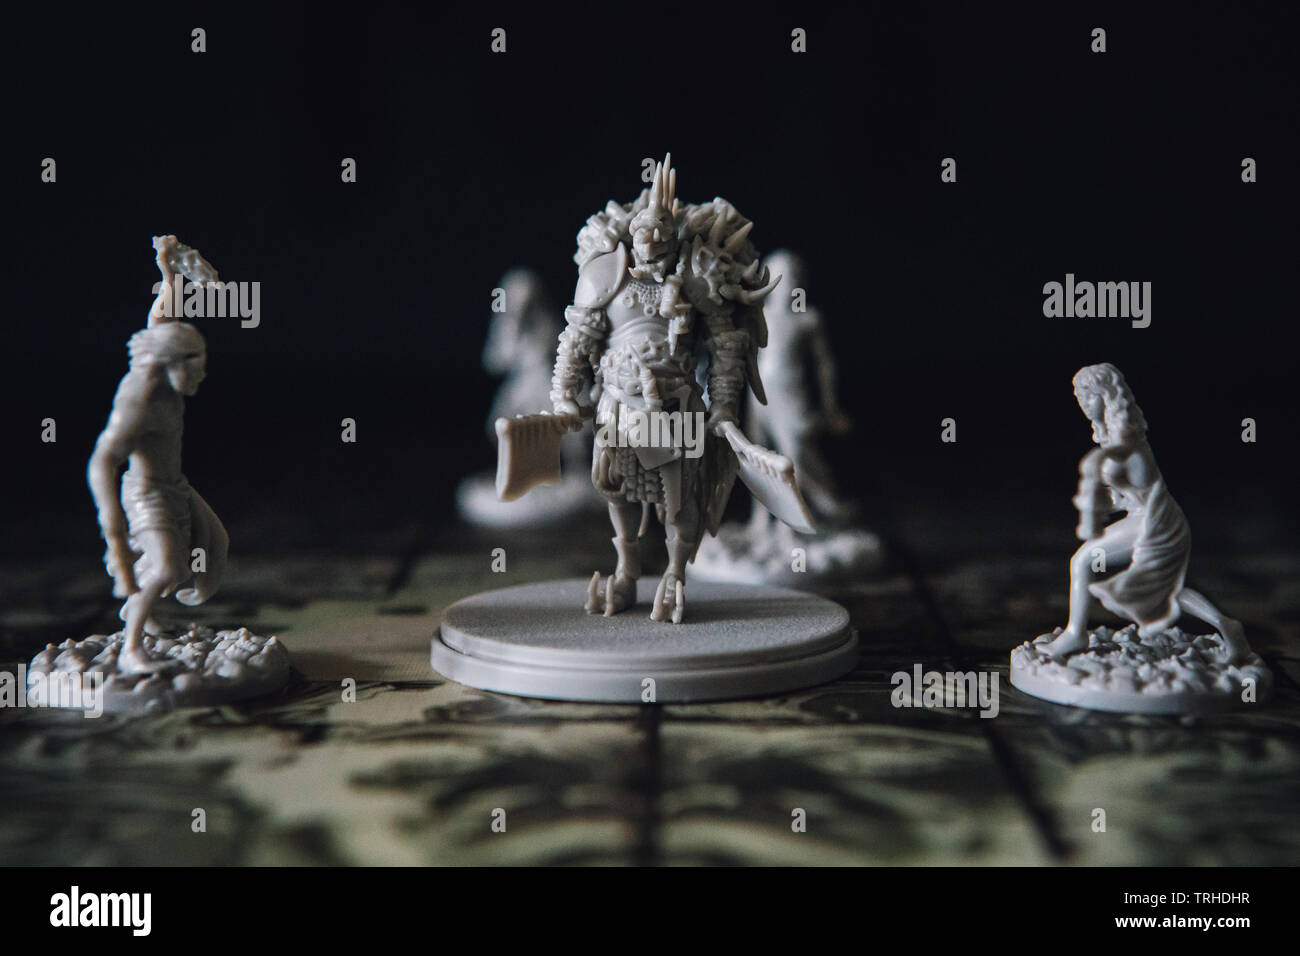 Miniatures In The Board Game Kingdom Death Monster By Adam Poots